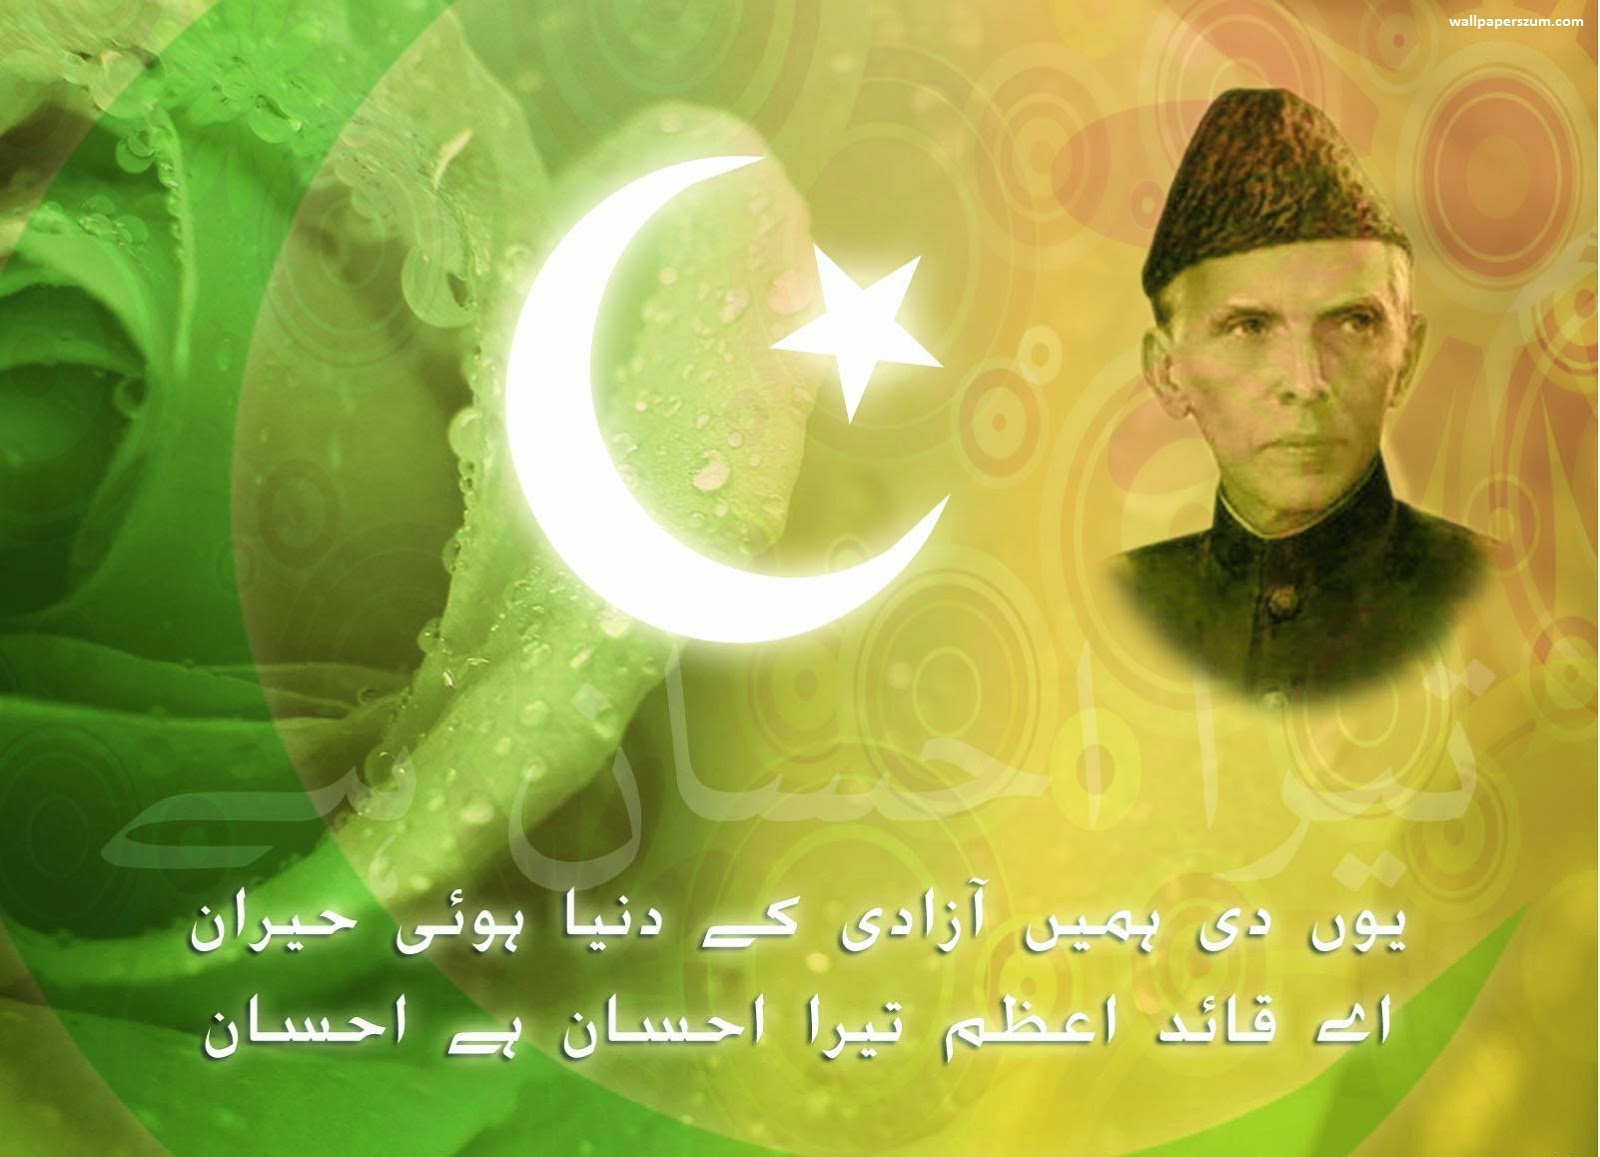 14 August Mubarak Facebook Wallpapers l Independence Day